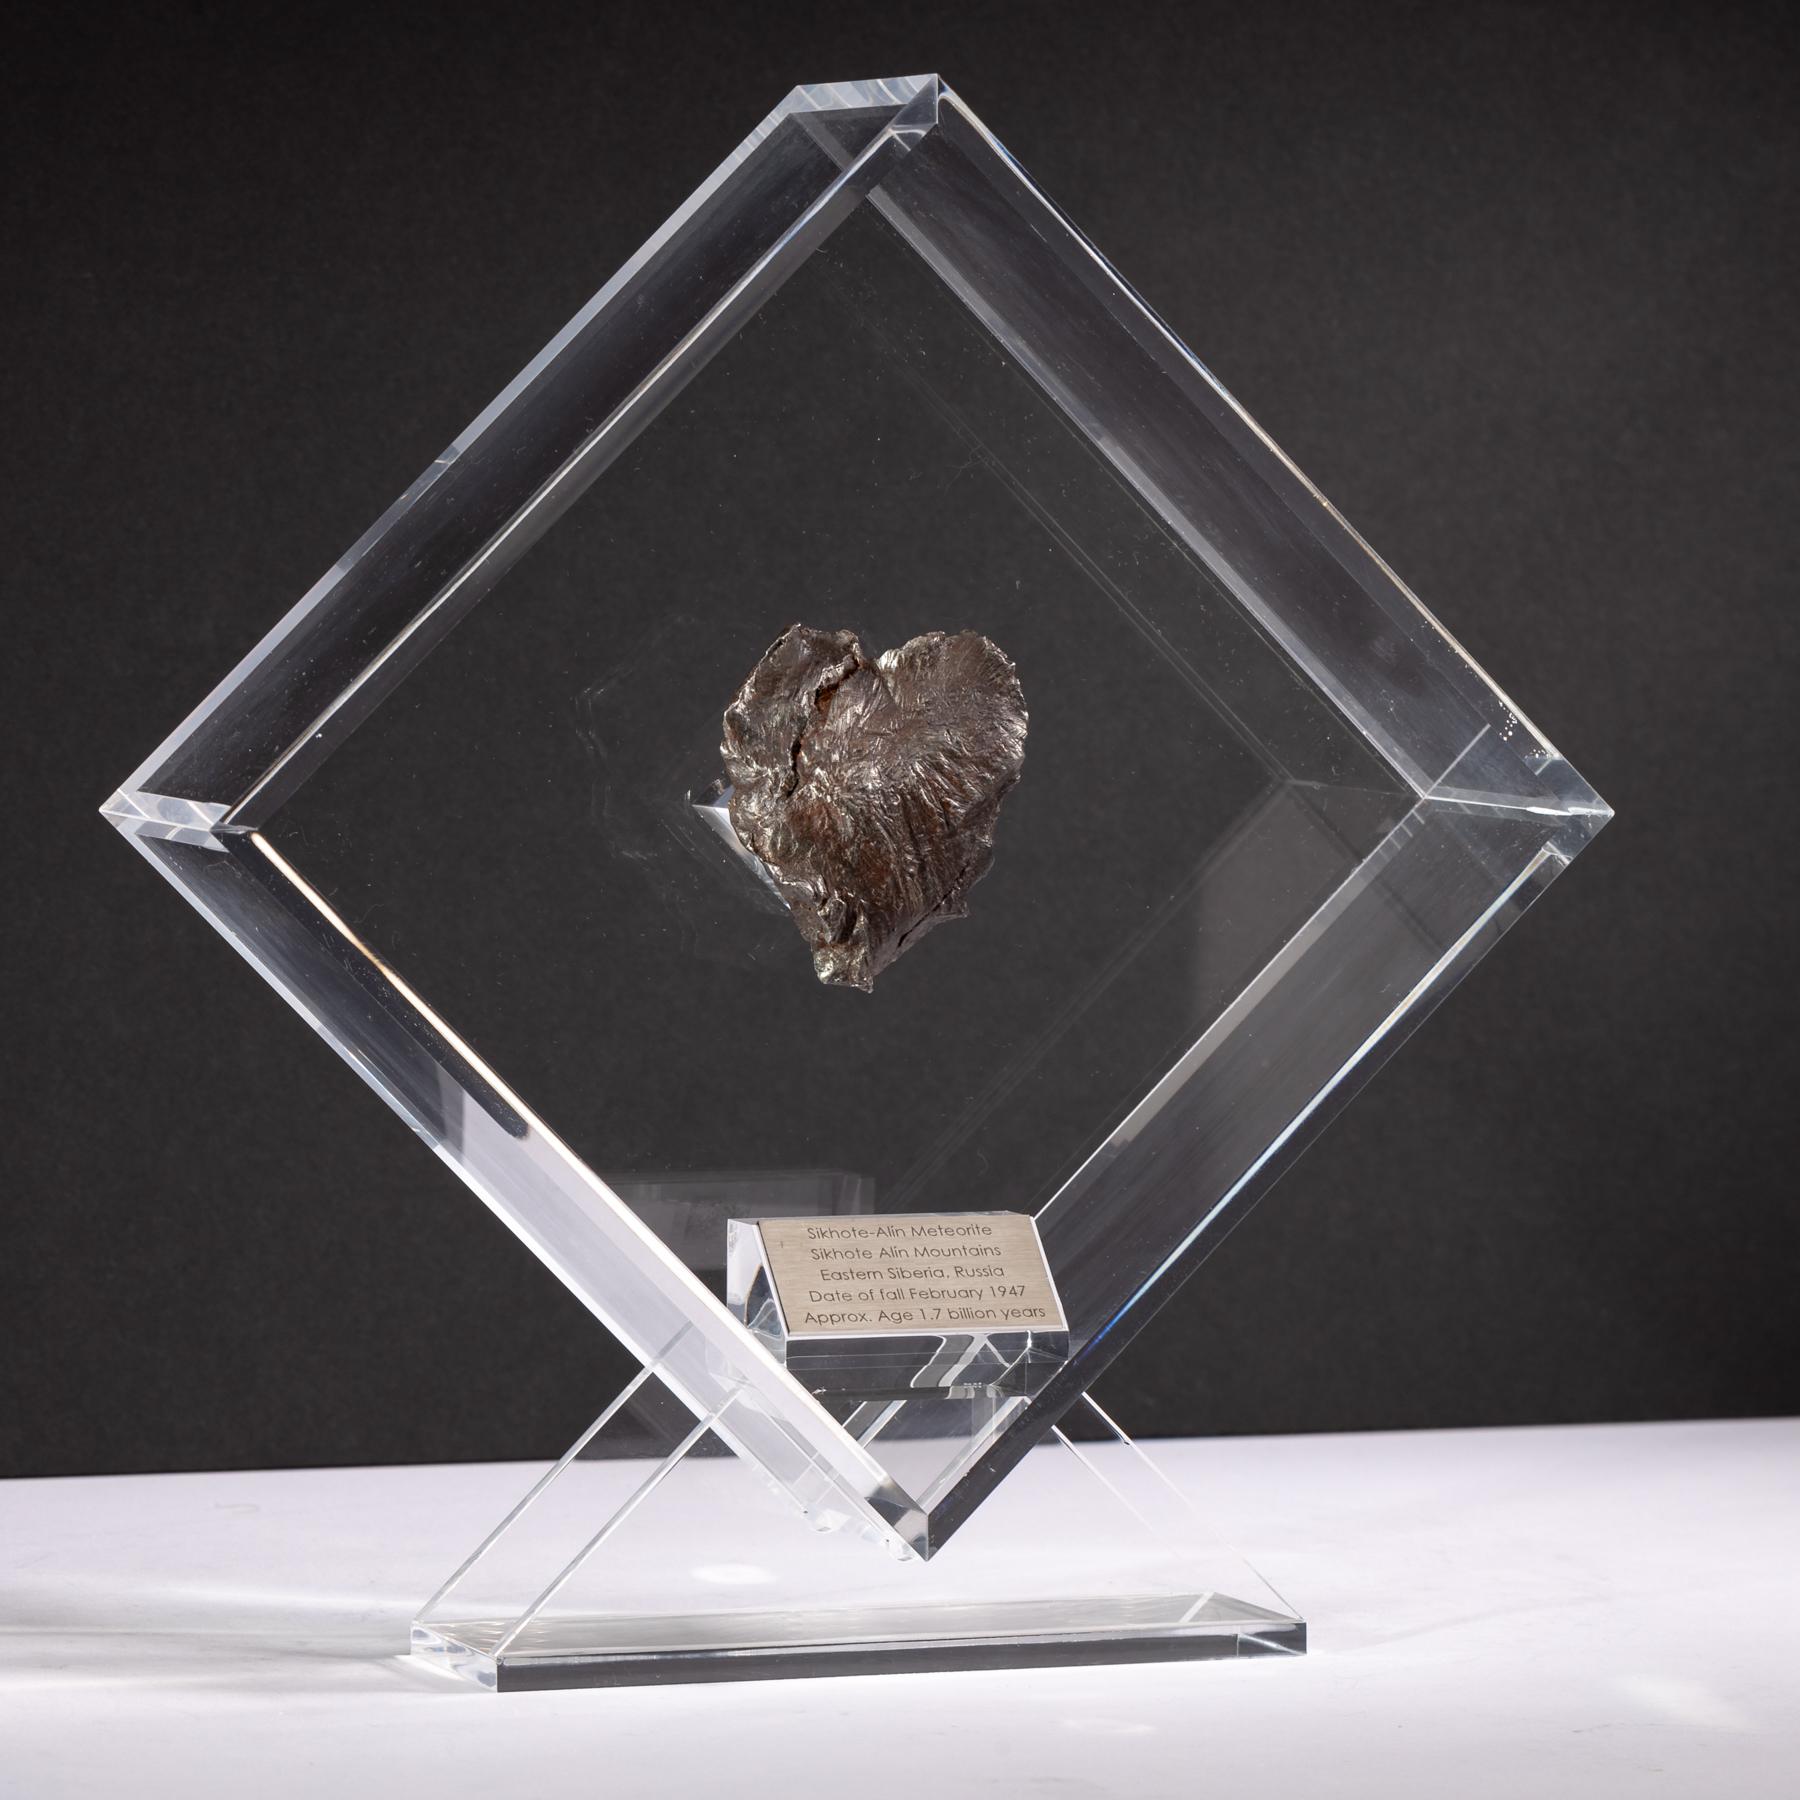 Mexican Sikhote Alin Meteorite from Siberia, Russia in a Custom Acrylic Display